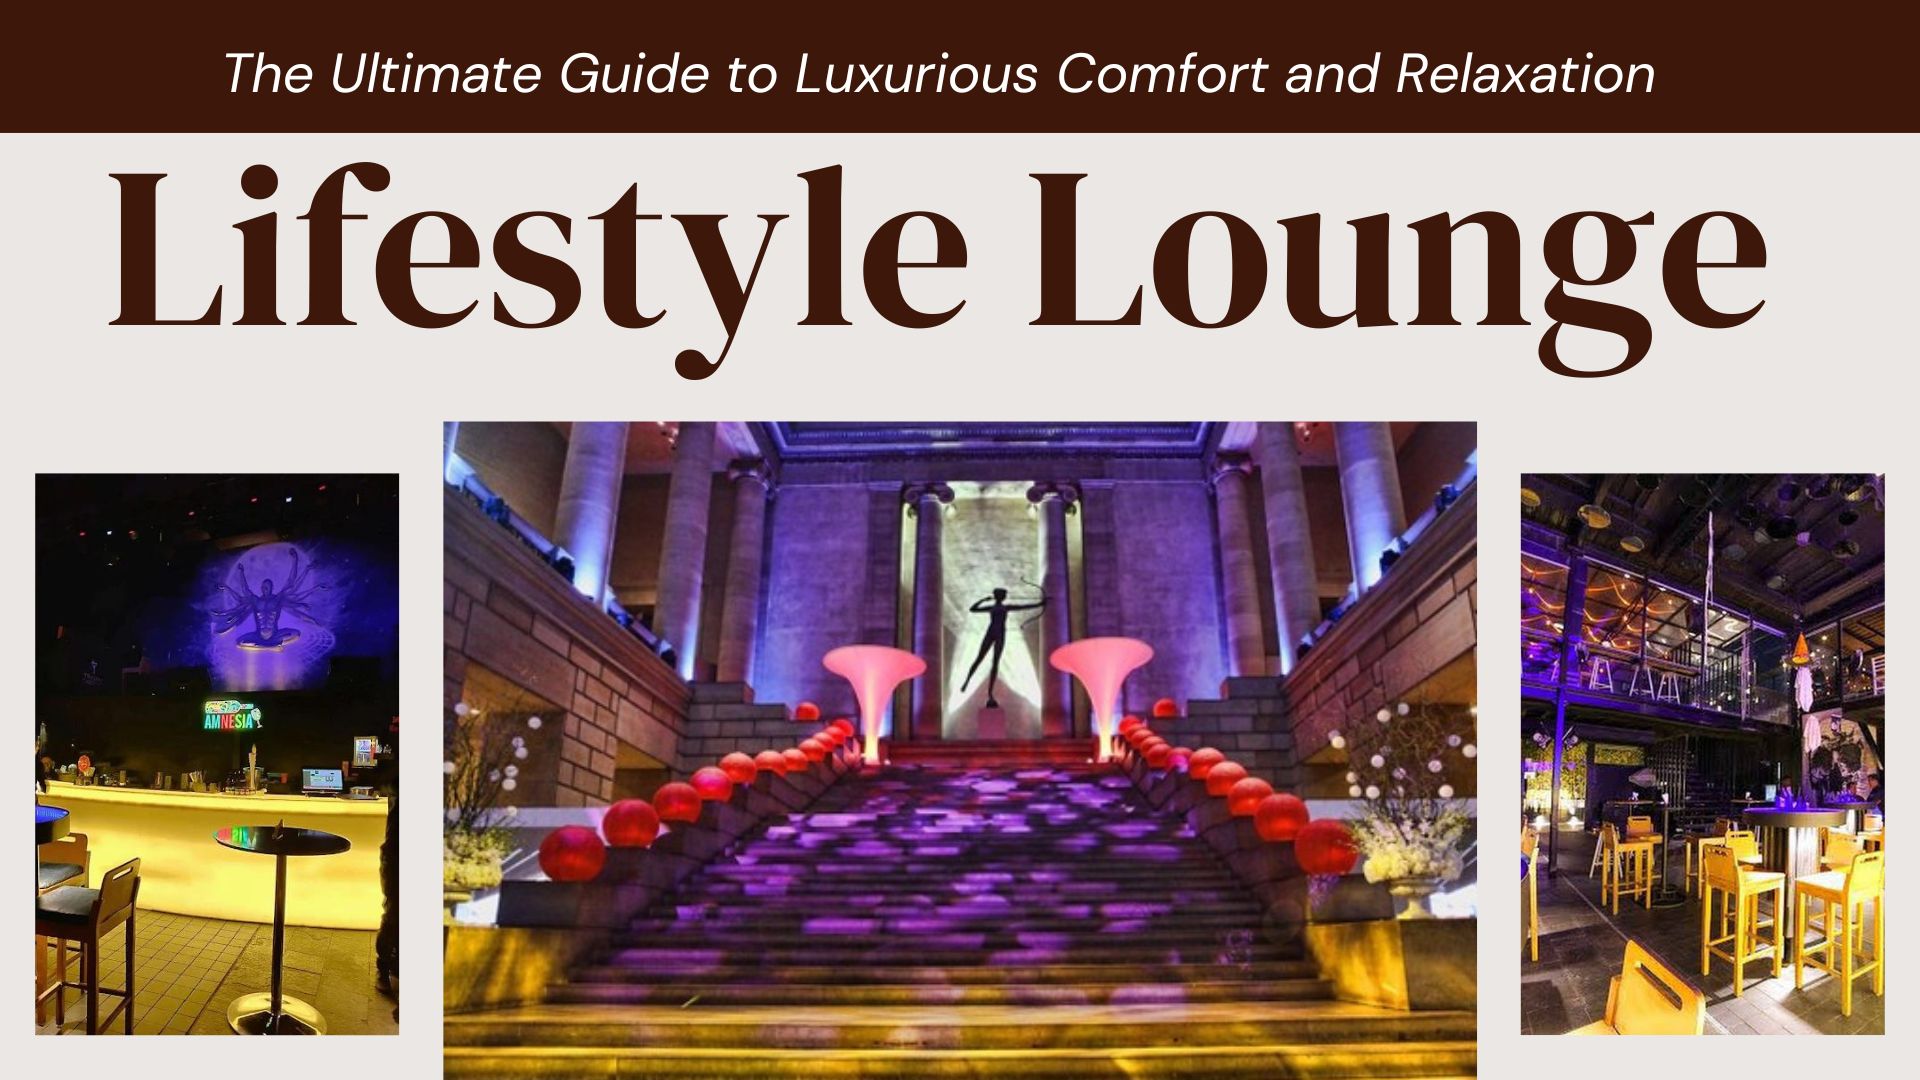 Lifestyle Lounge The Ultimate Guide to Luxurious Comfort and Relaxation